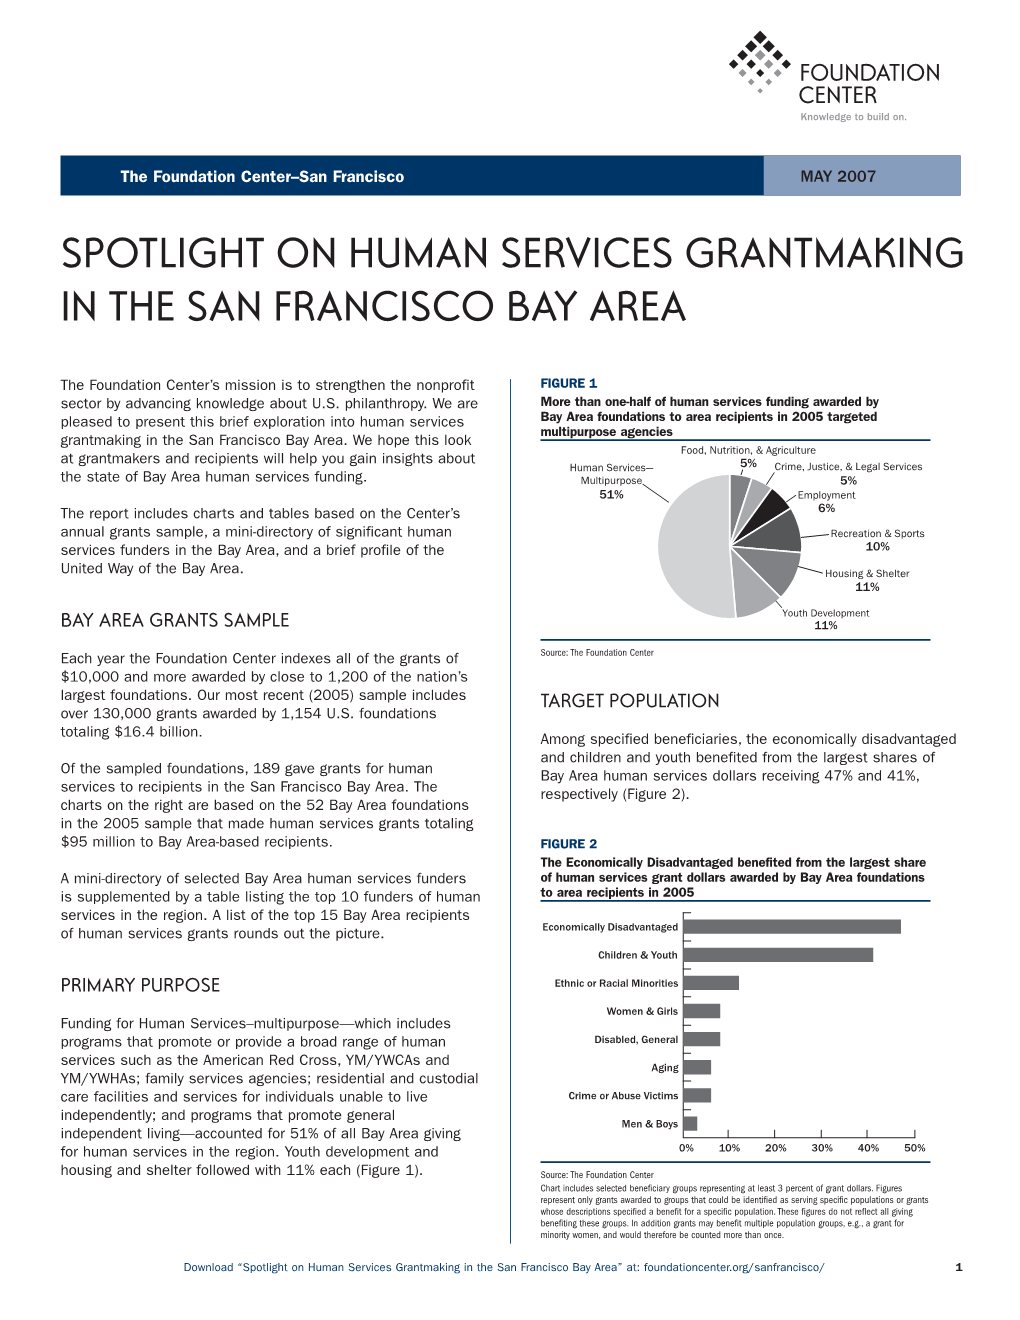 Spotlight on Human Services Grantmaking in the San Francisco Bay Area